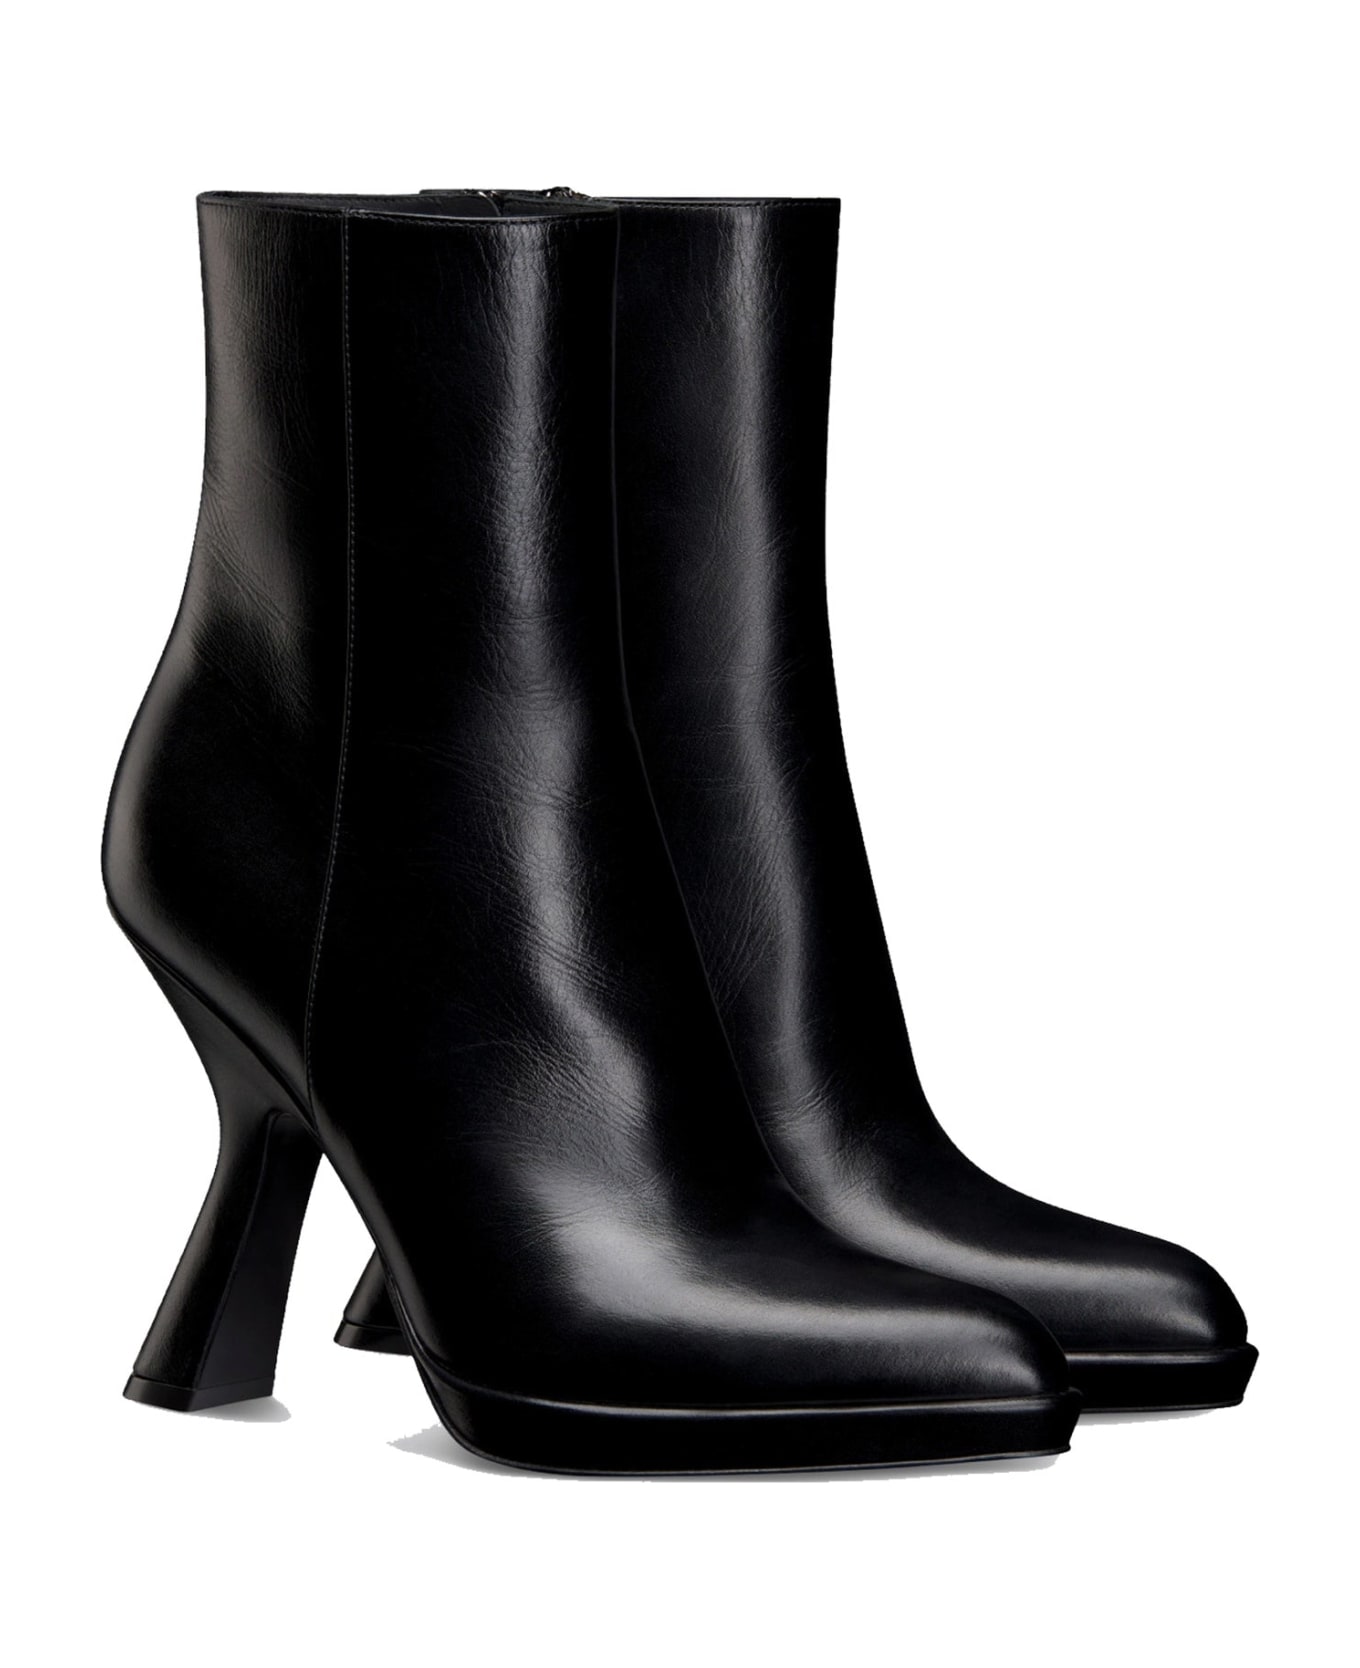 Dior D-fiction Ankle Boots - Black ブーツ